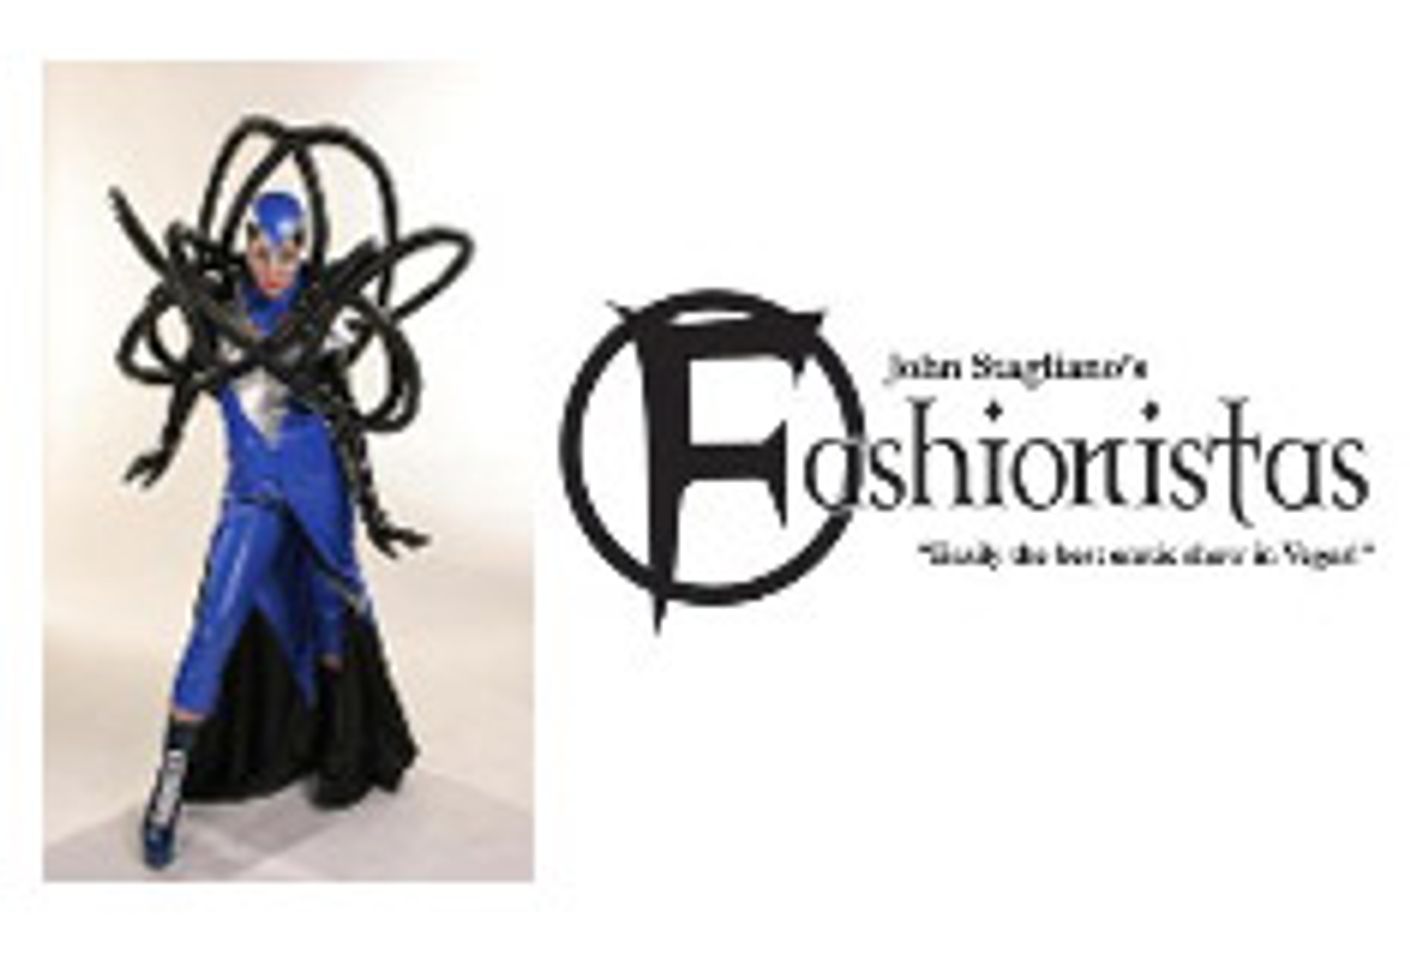 'The Fashionistas' Named One of Vegas' 10 Best Shows